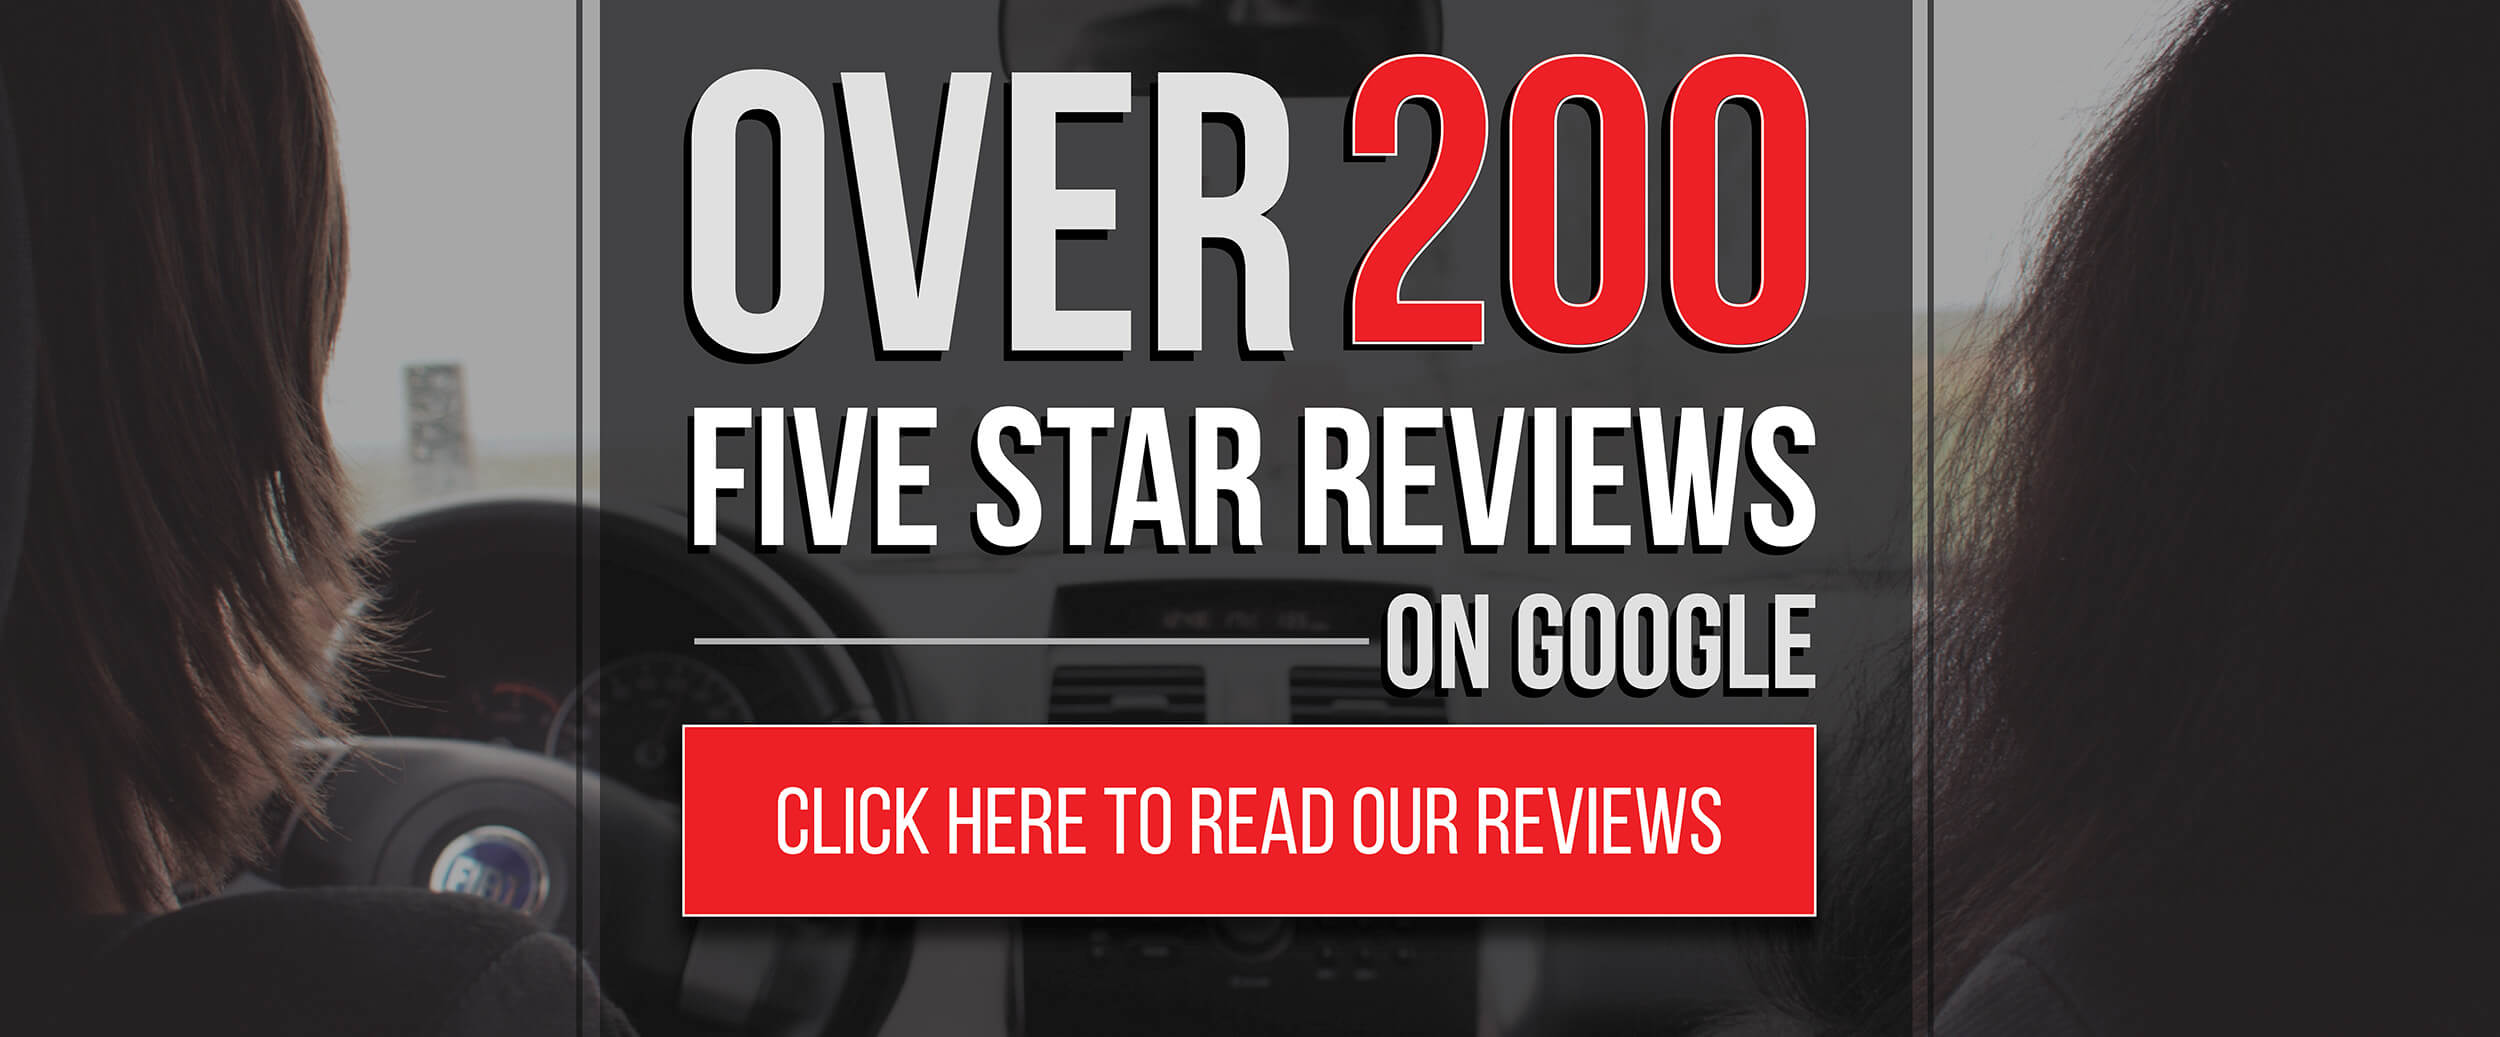 Over 180 Five Star Reviews on Google - click here to read our reviews